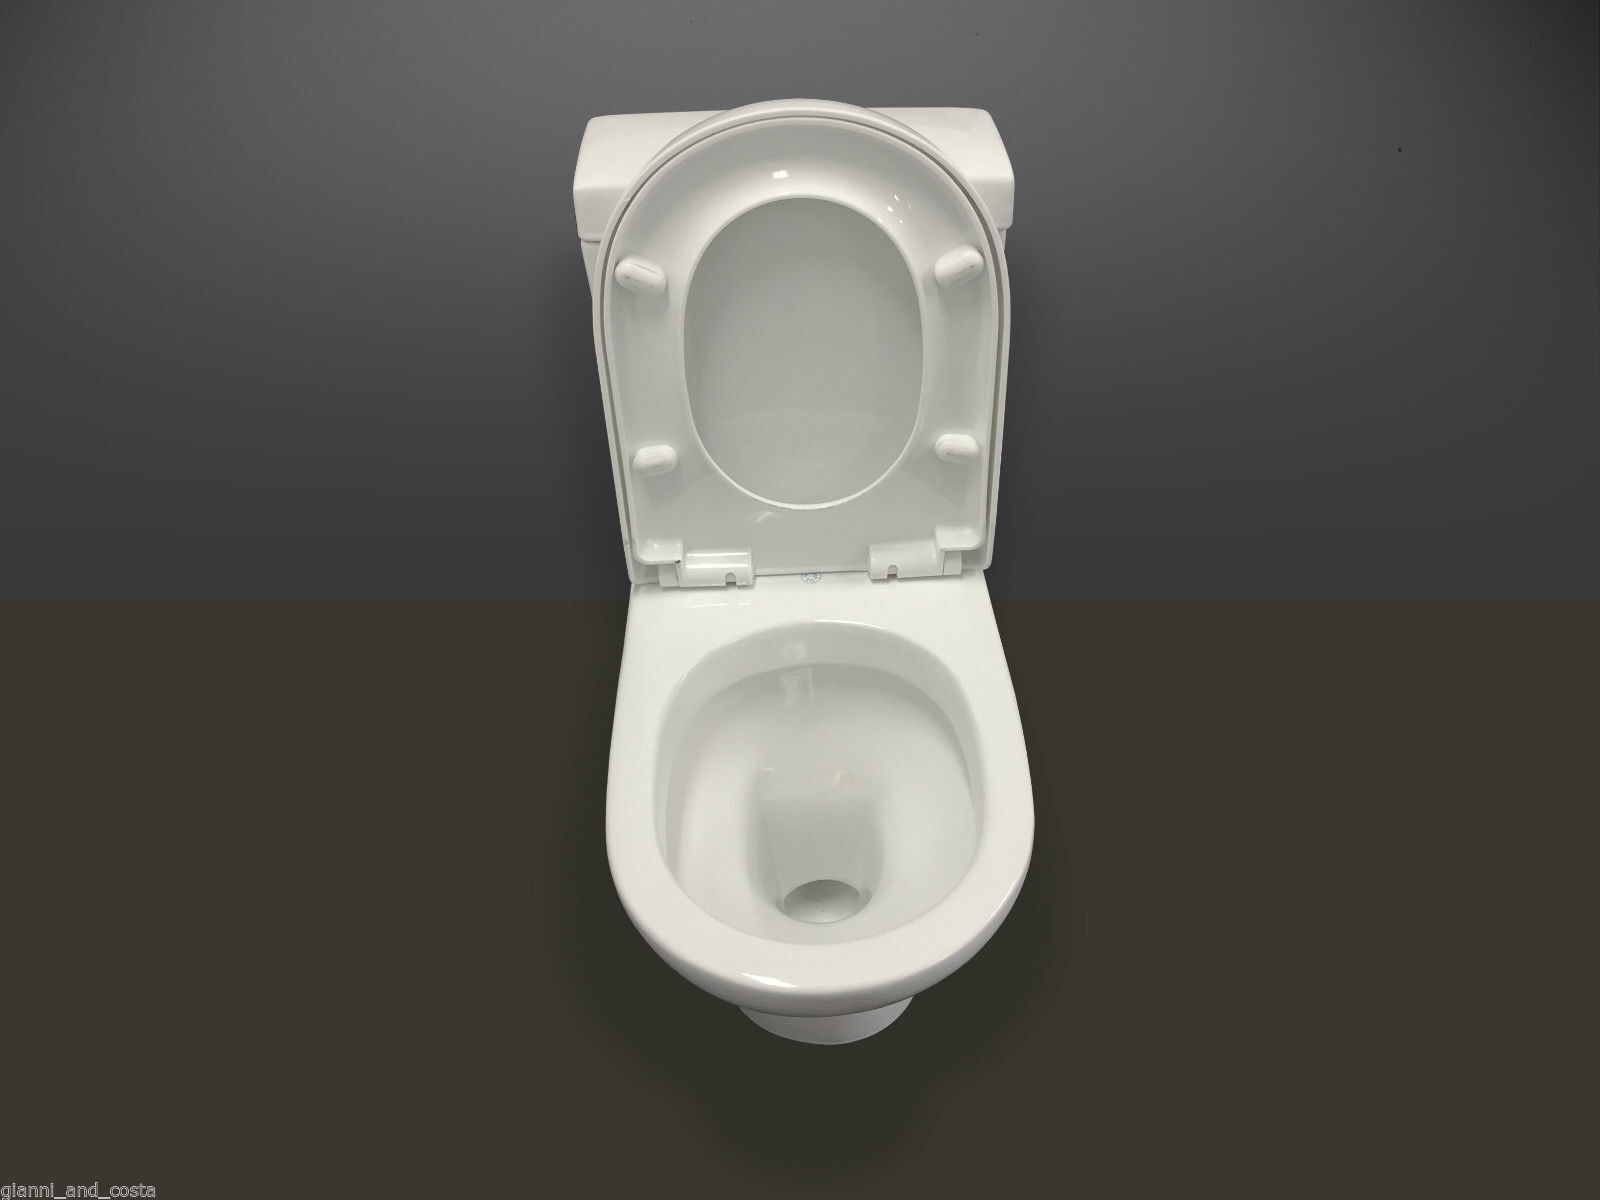 Ceramic Toilet Suite Back to Wall Model Taormina GC69 S-Trap 70-170mm